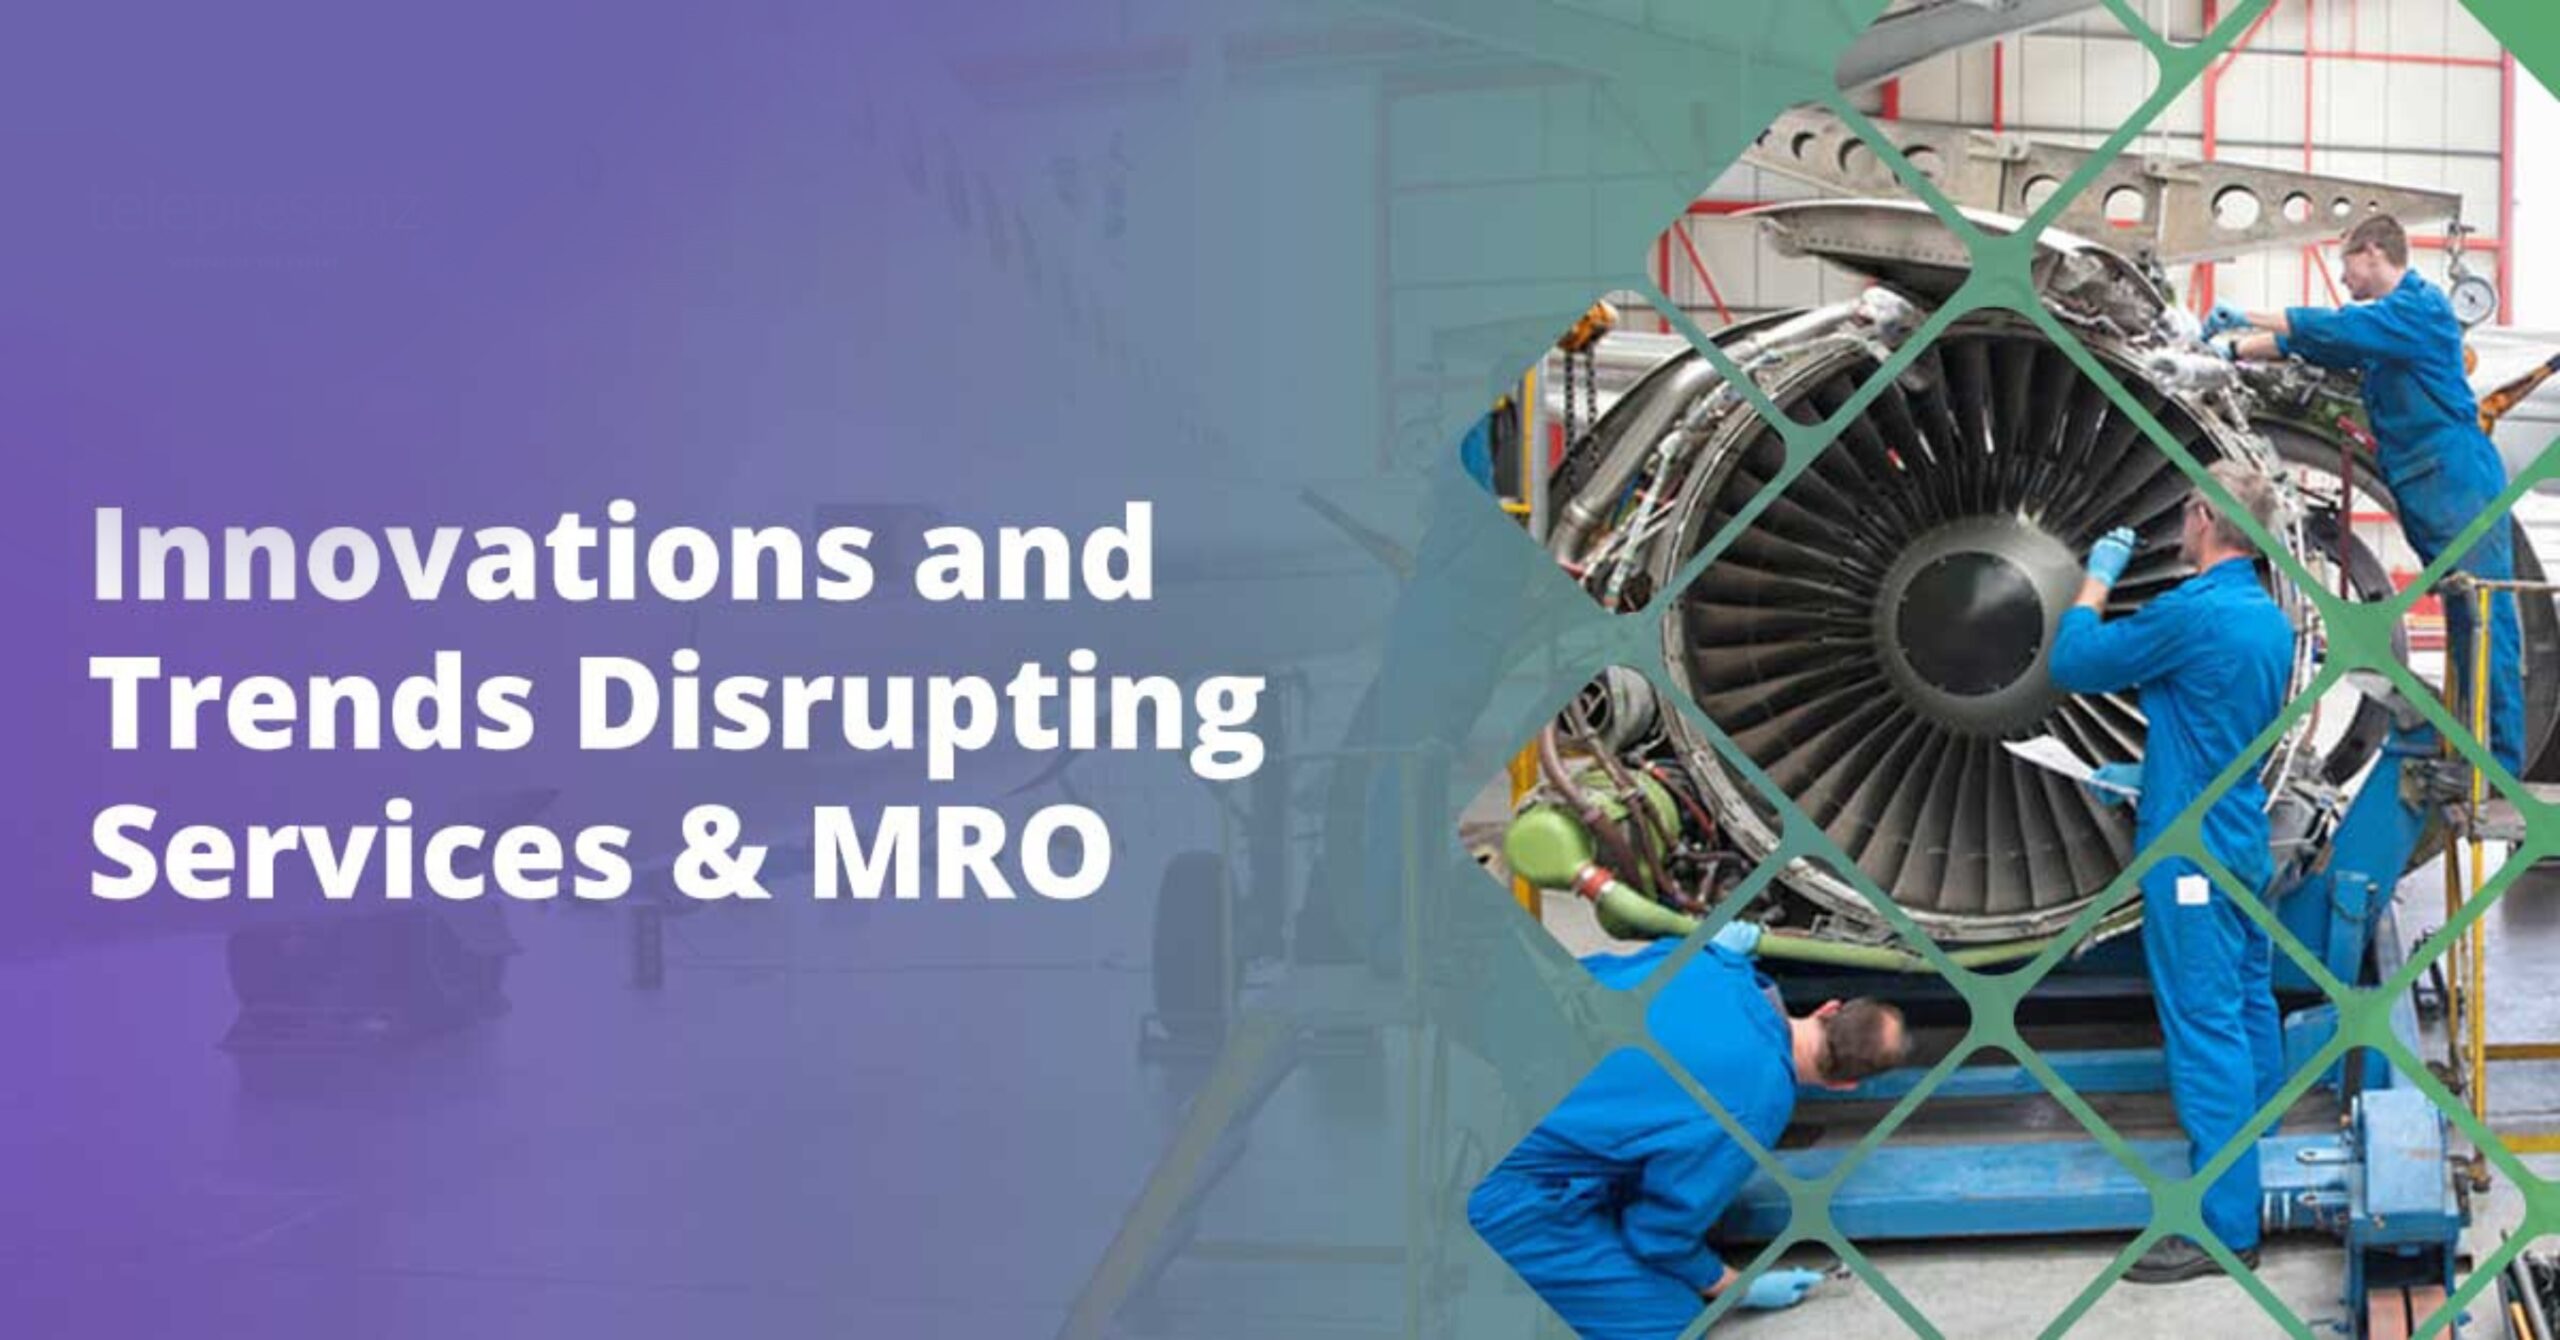 Innovations and Trends Disrupting Services & MRO